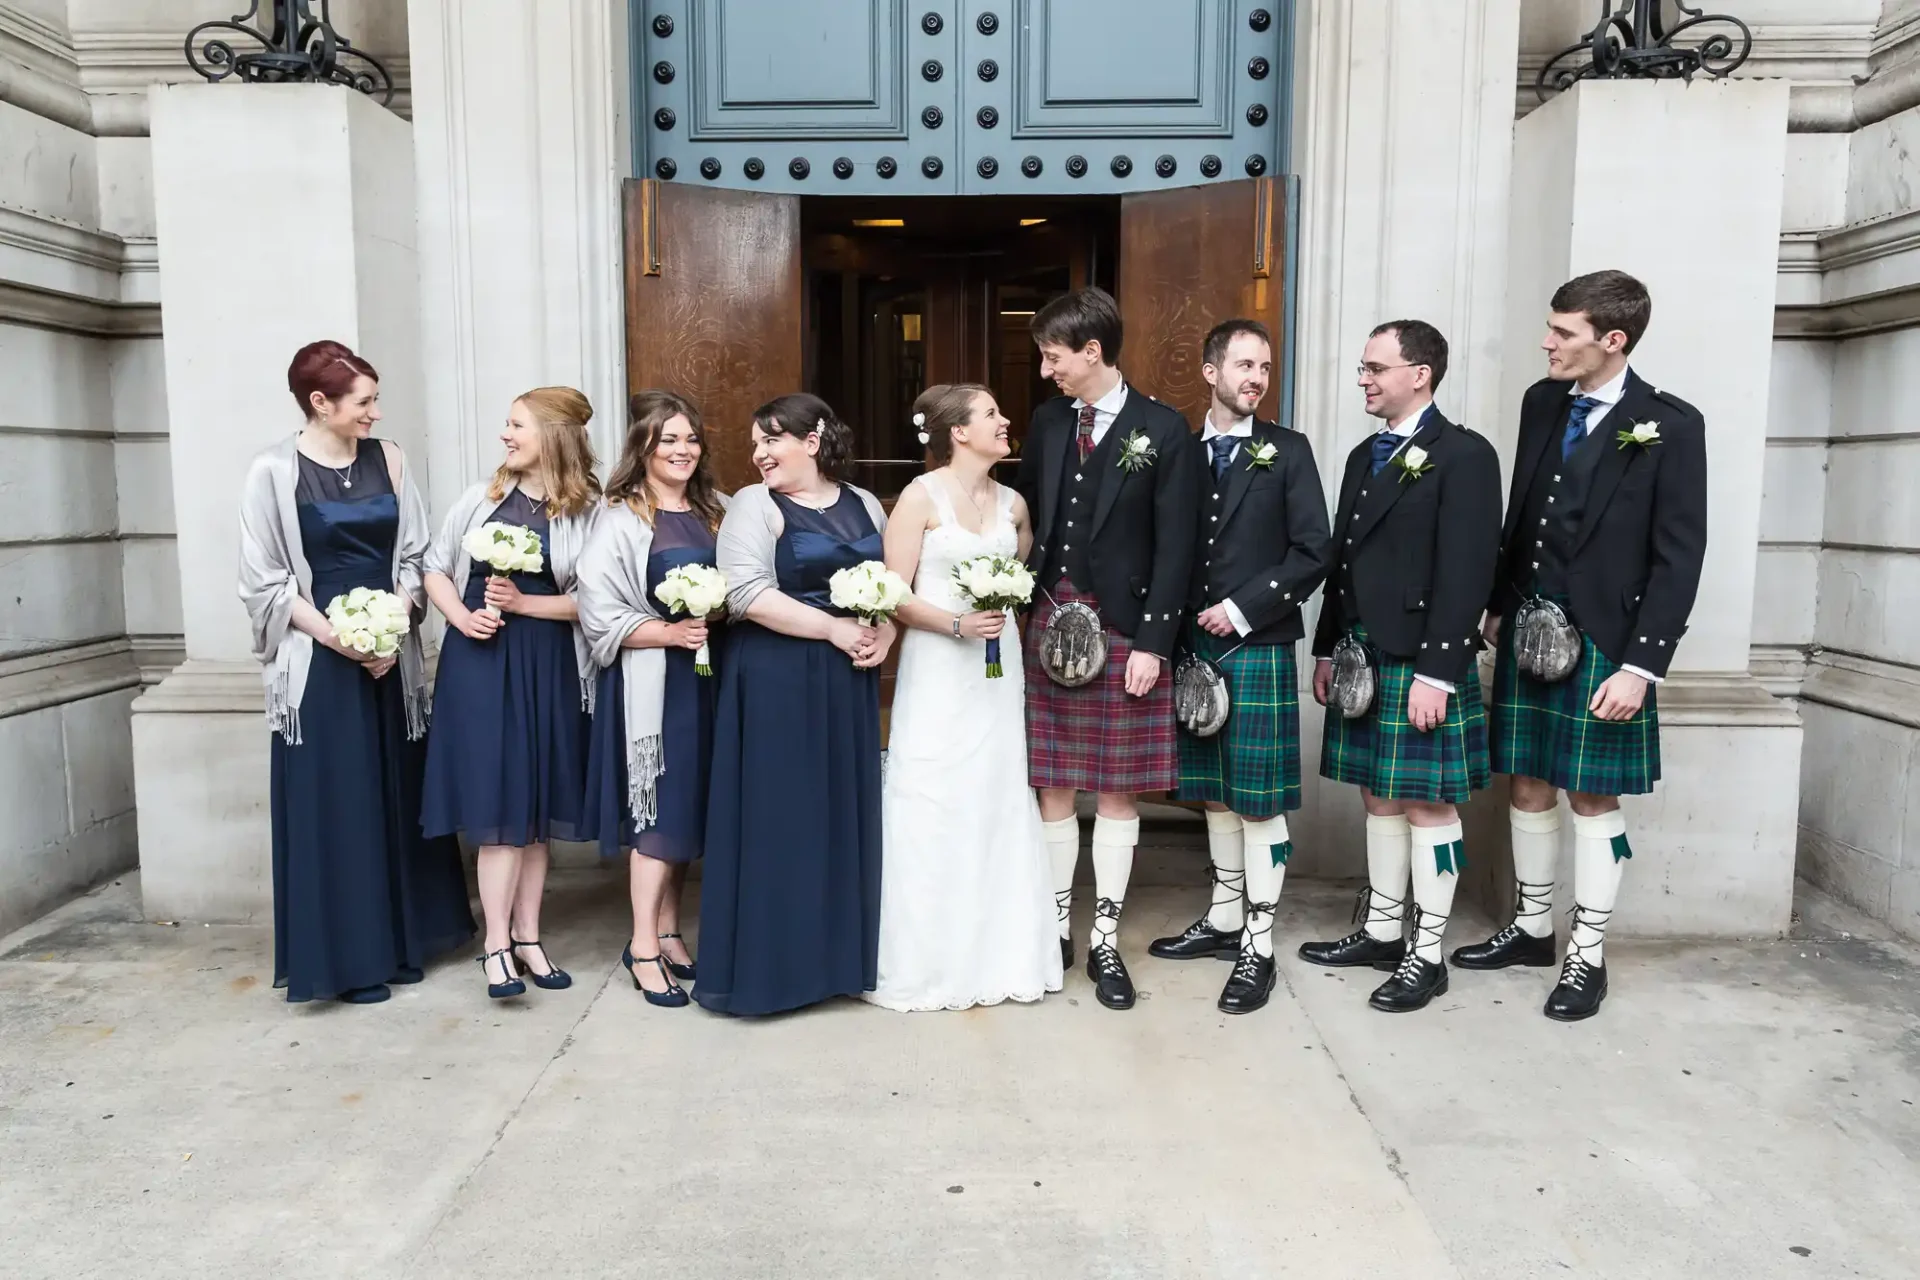 A wedding group with four women in navy dresses and five men in scottish kilts, with the couple in the middle, standing in front of a building entrance.